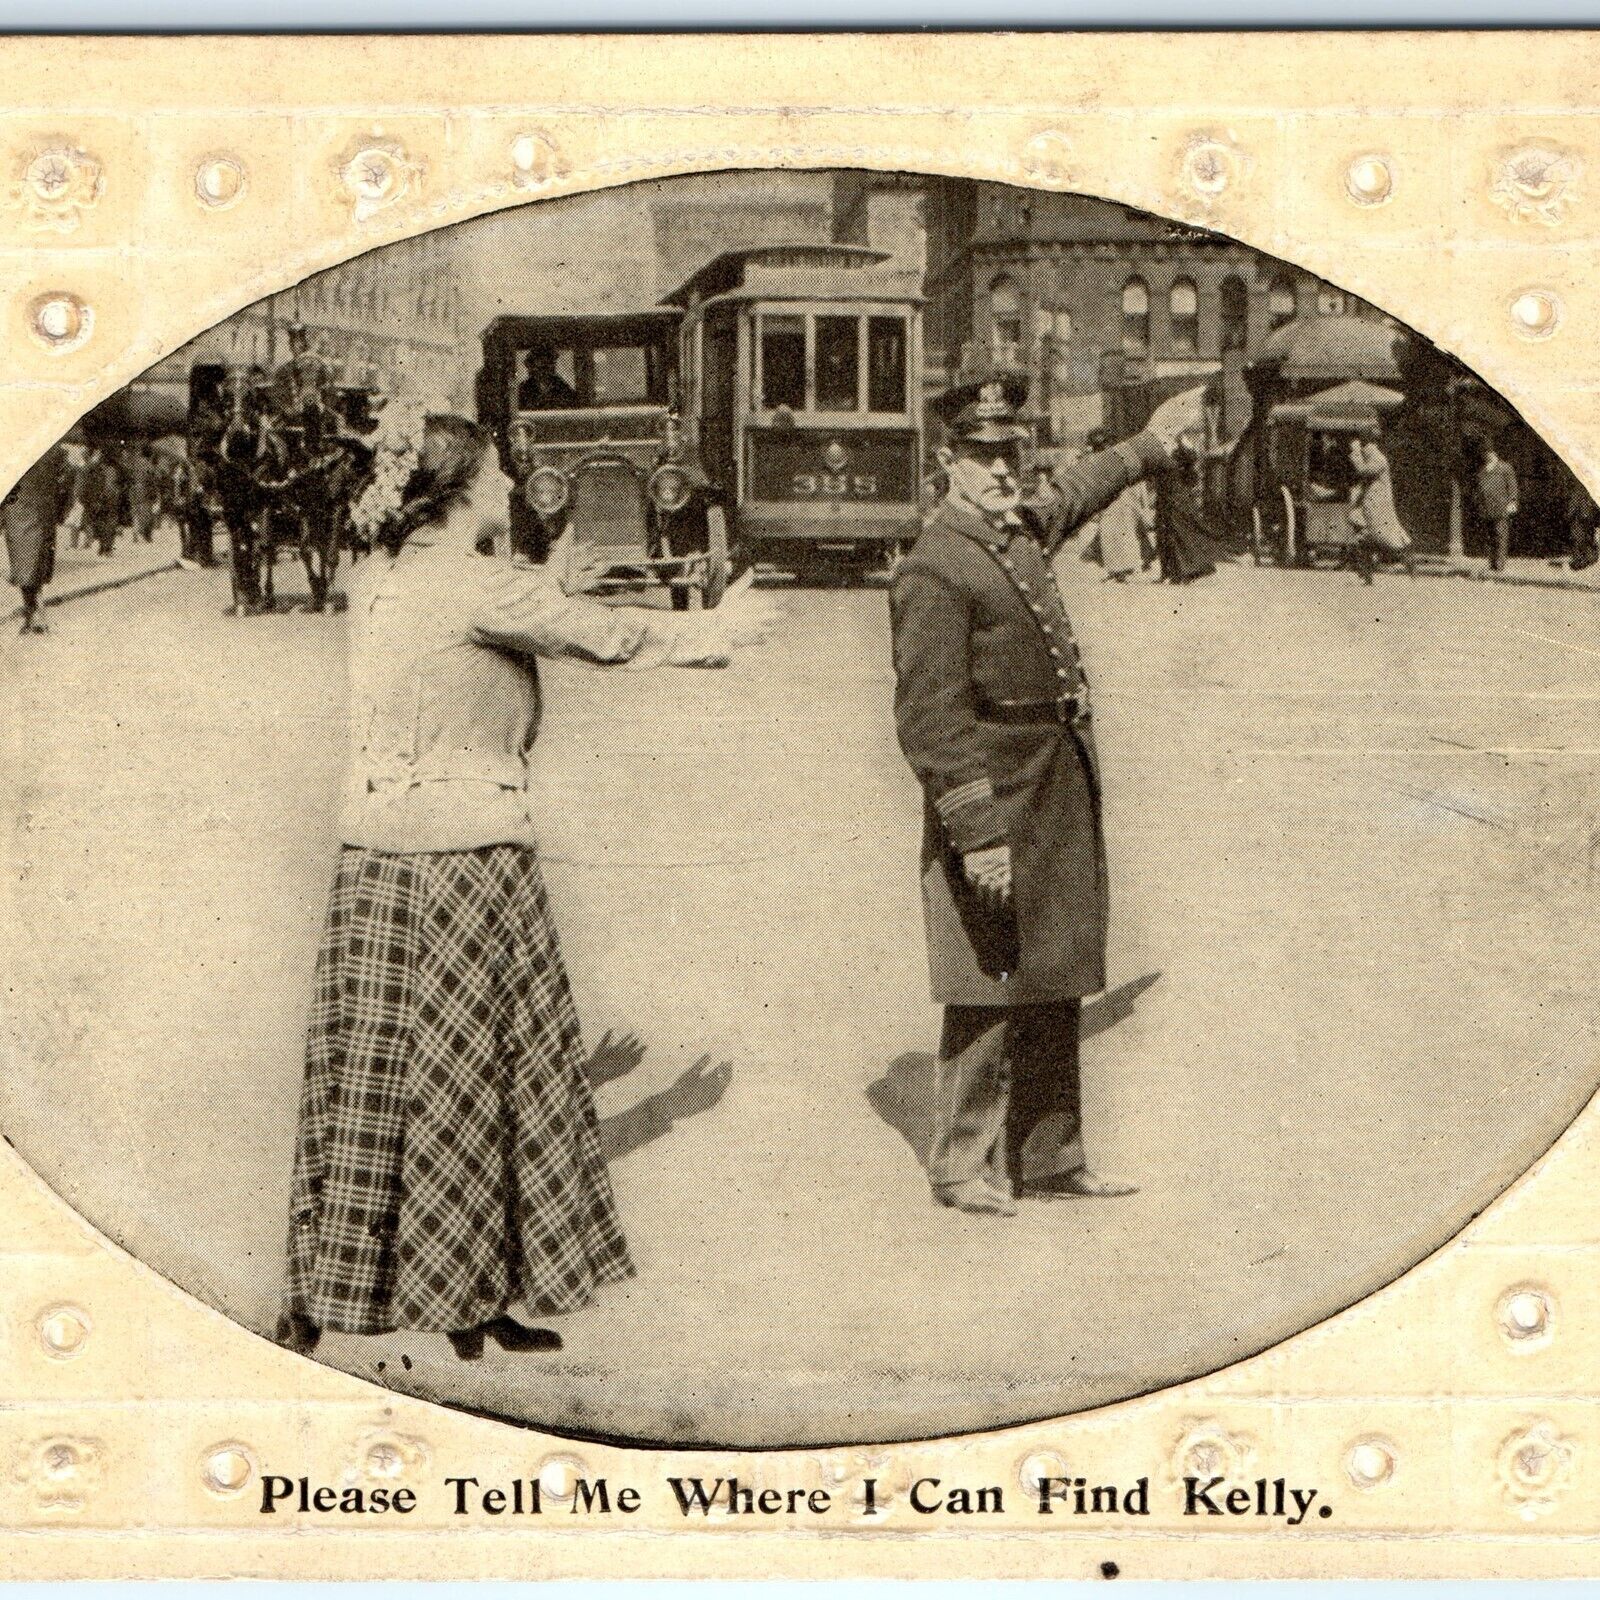 c1910s Busy Traffic Controller Flagger Street Car Downtown Auto KELLY?? A143